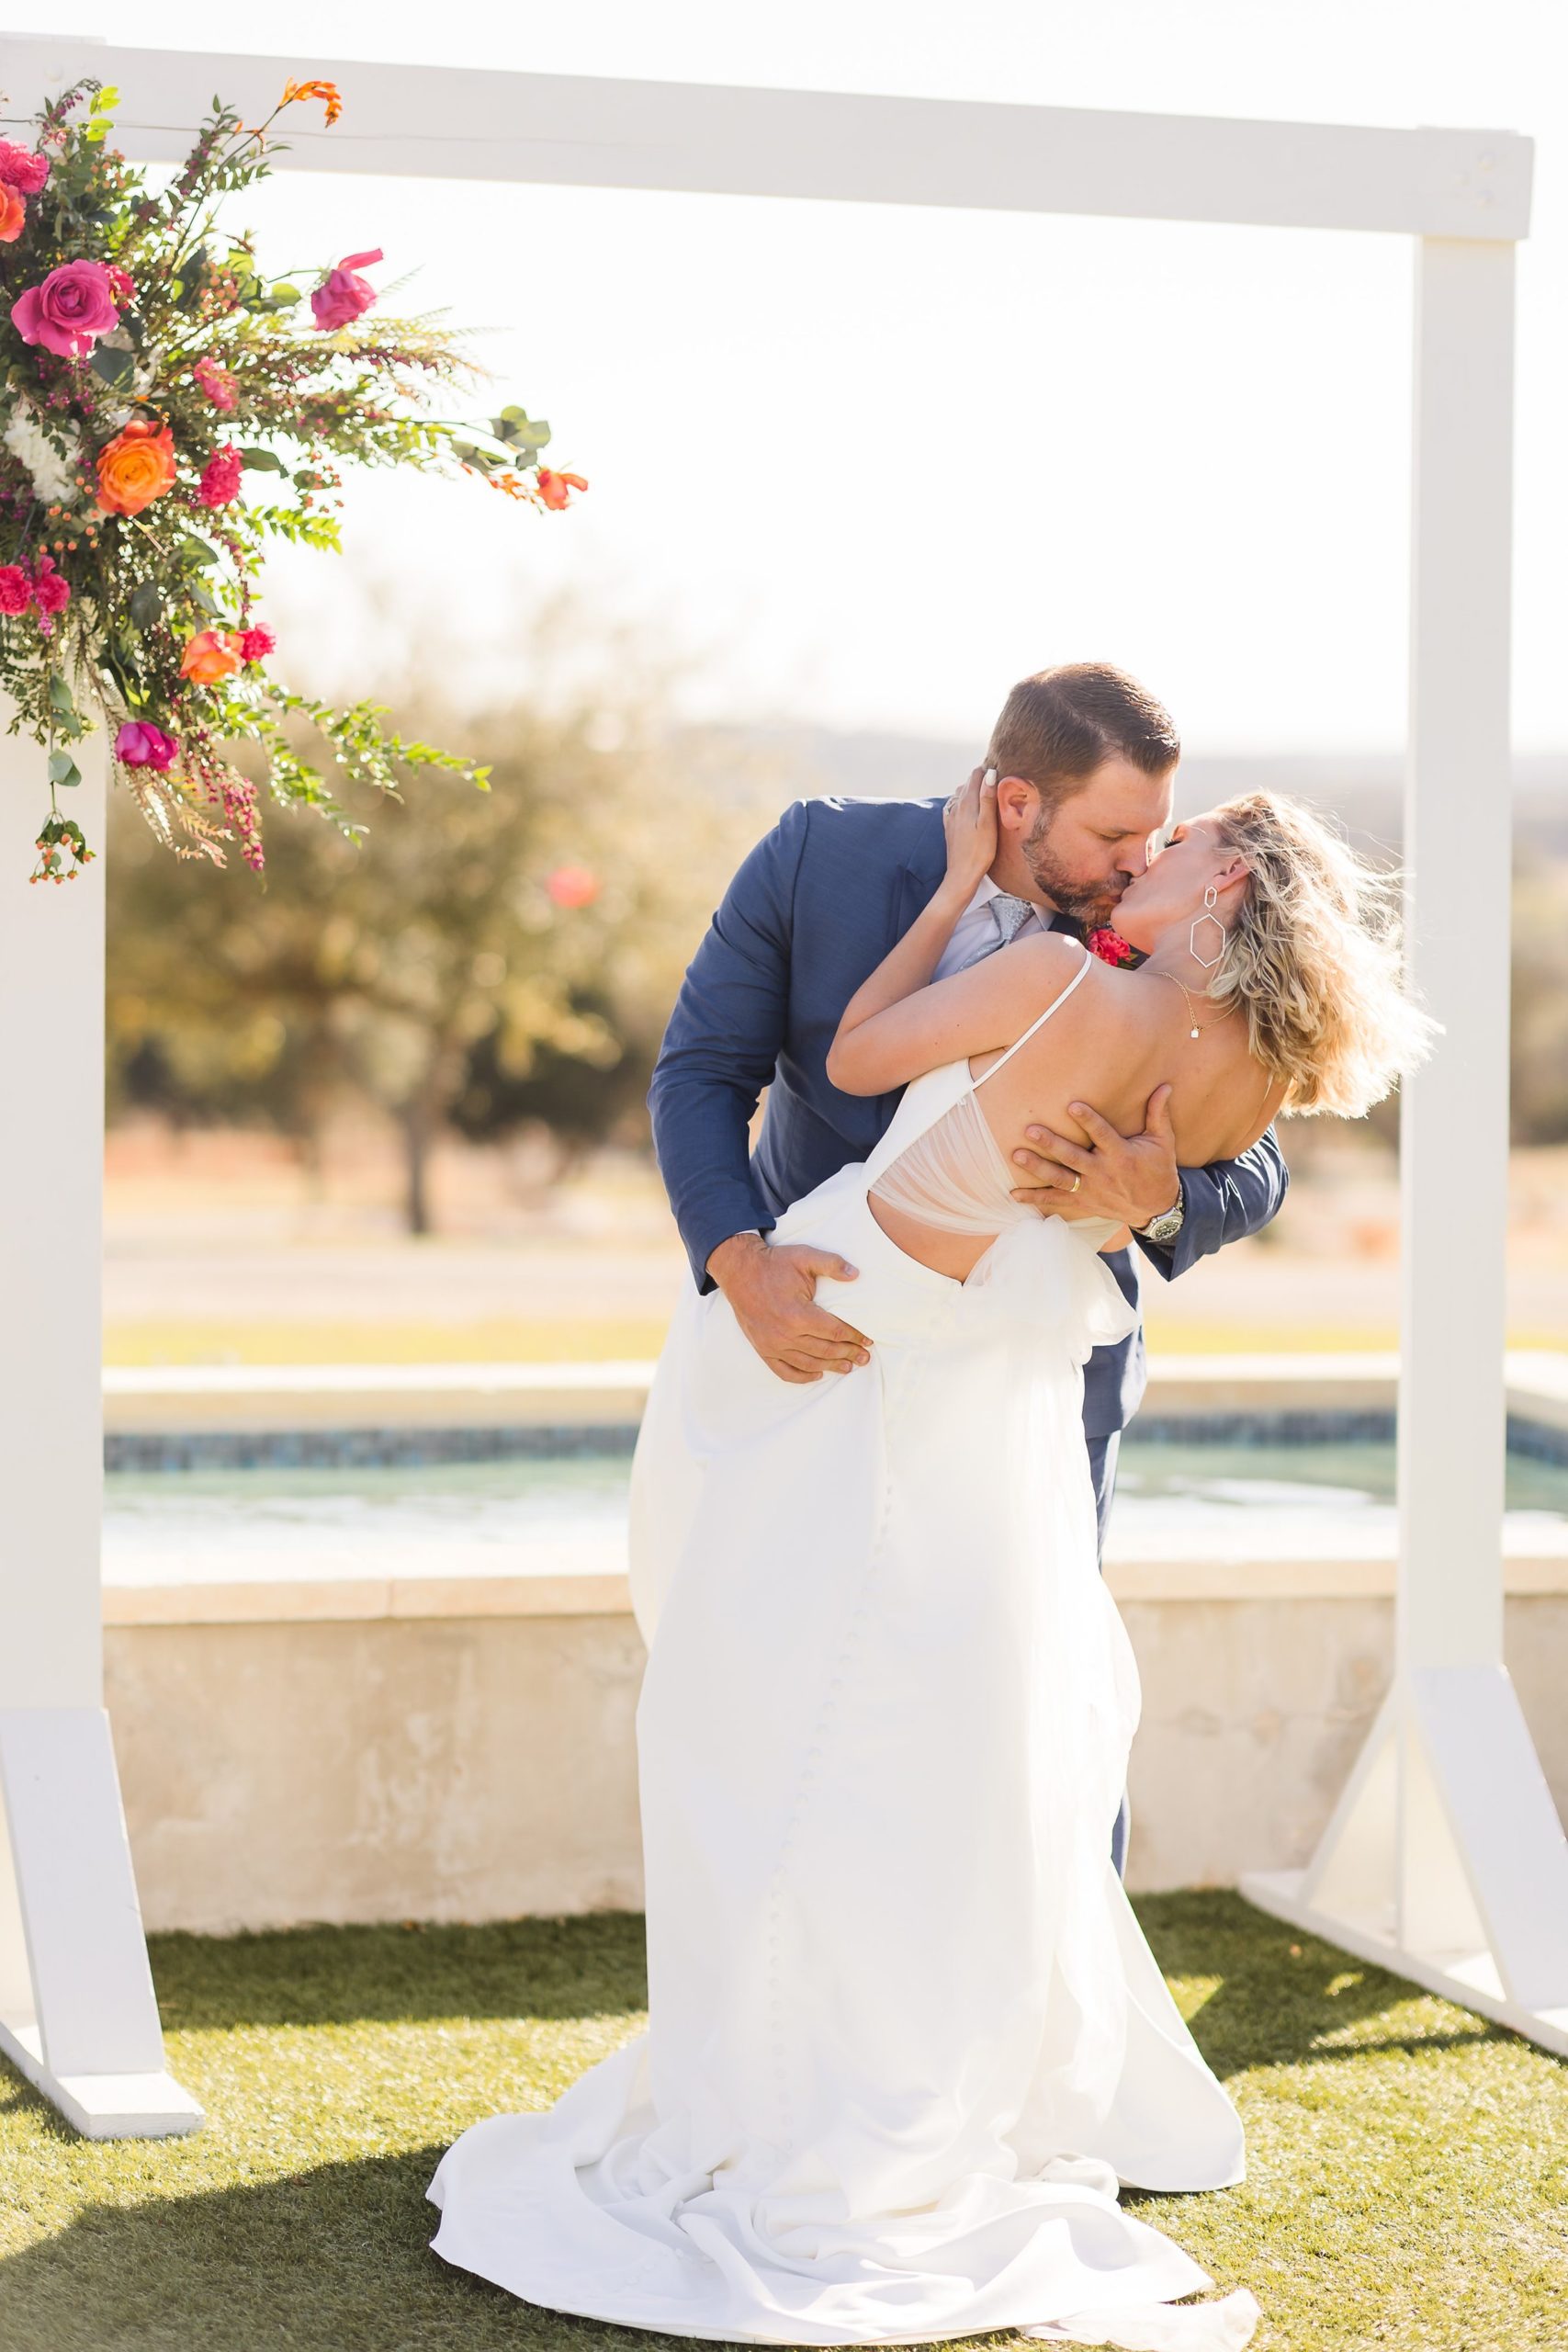 First Kiss at the Camp Hideaway Retreat wedding venue in Fredericksburg, Texas. Photograph taken by Austin wedding photographers, Joanna and Brett Photography.